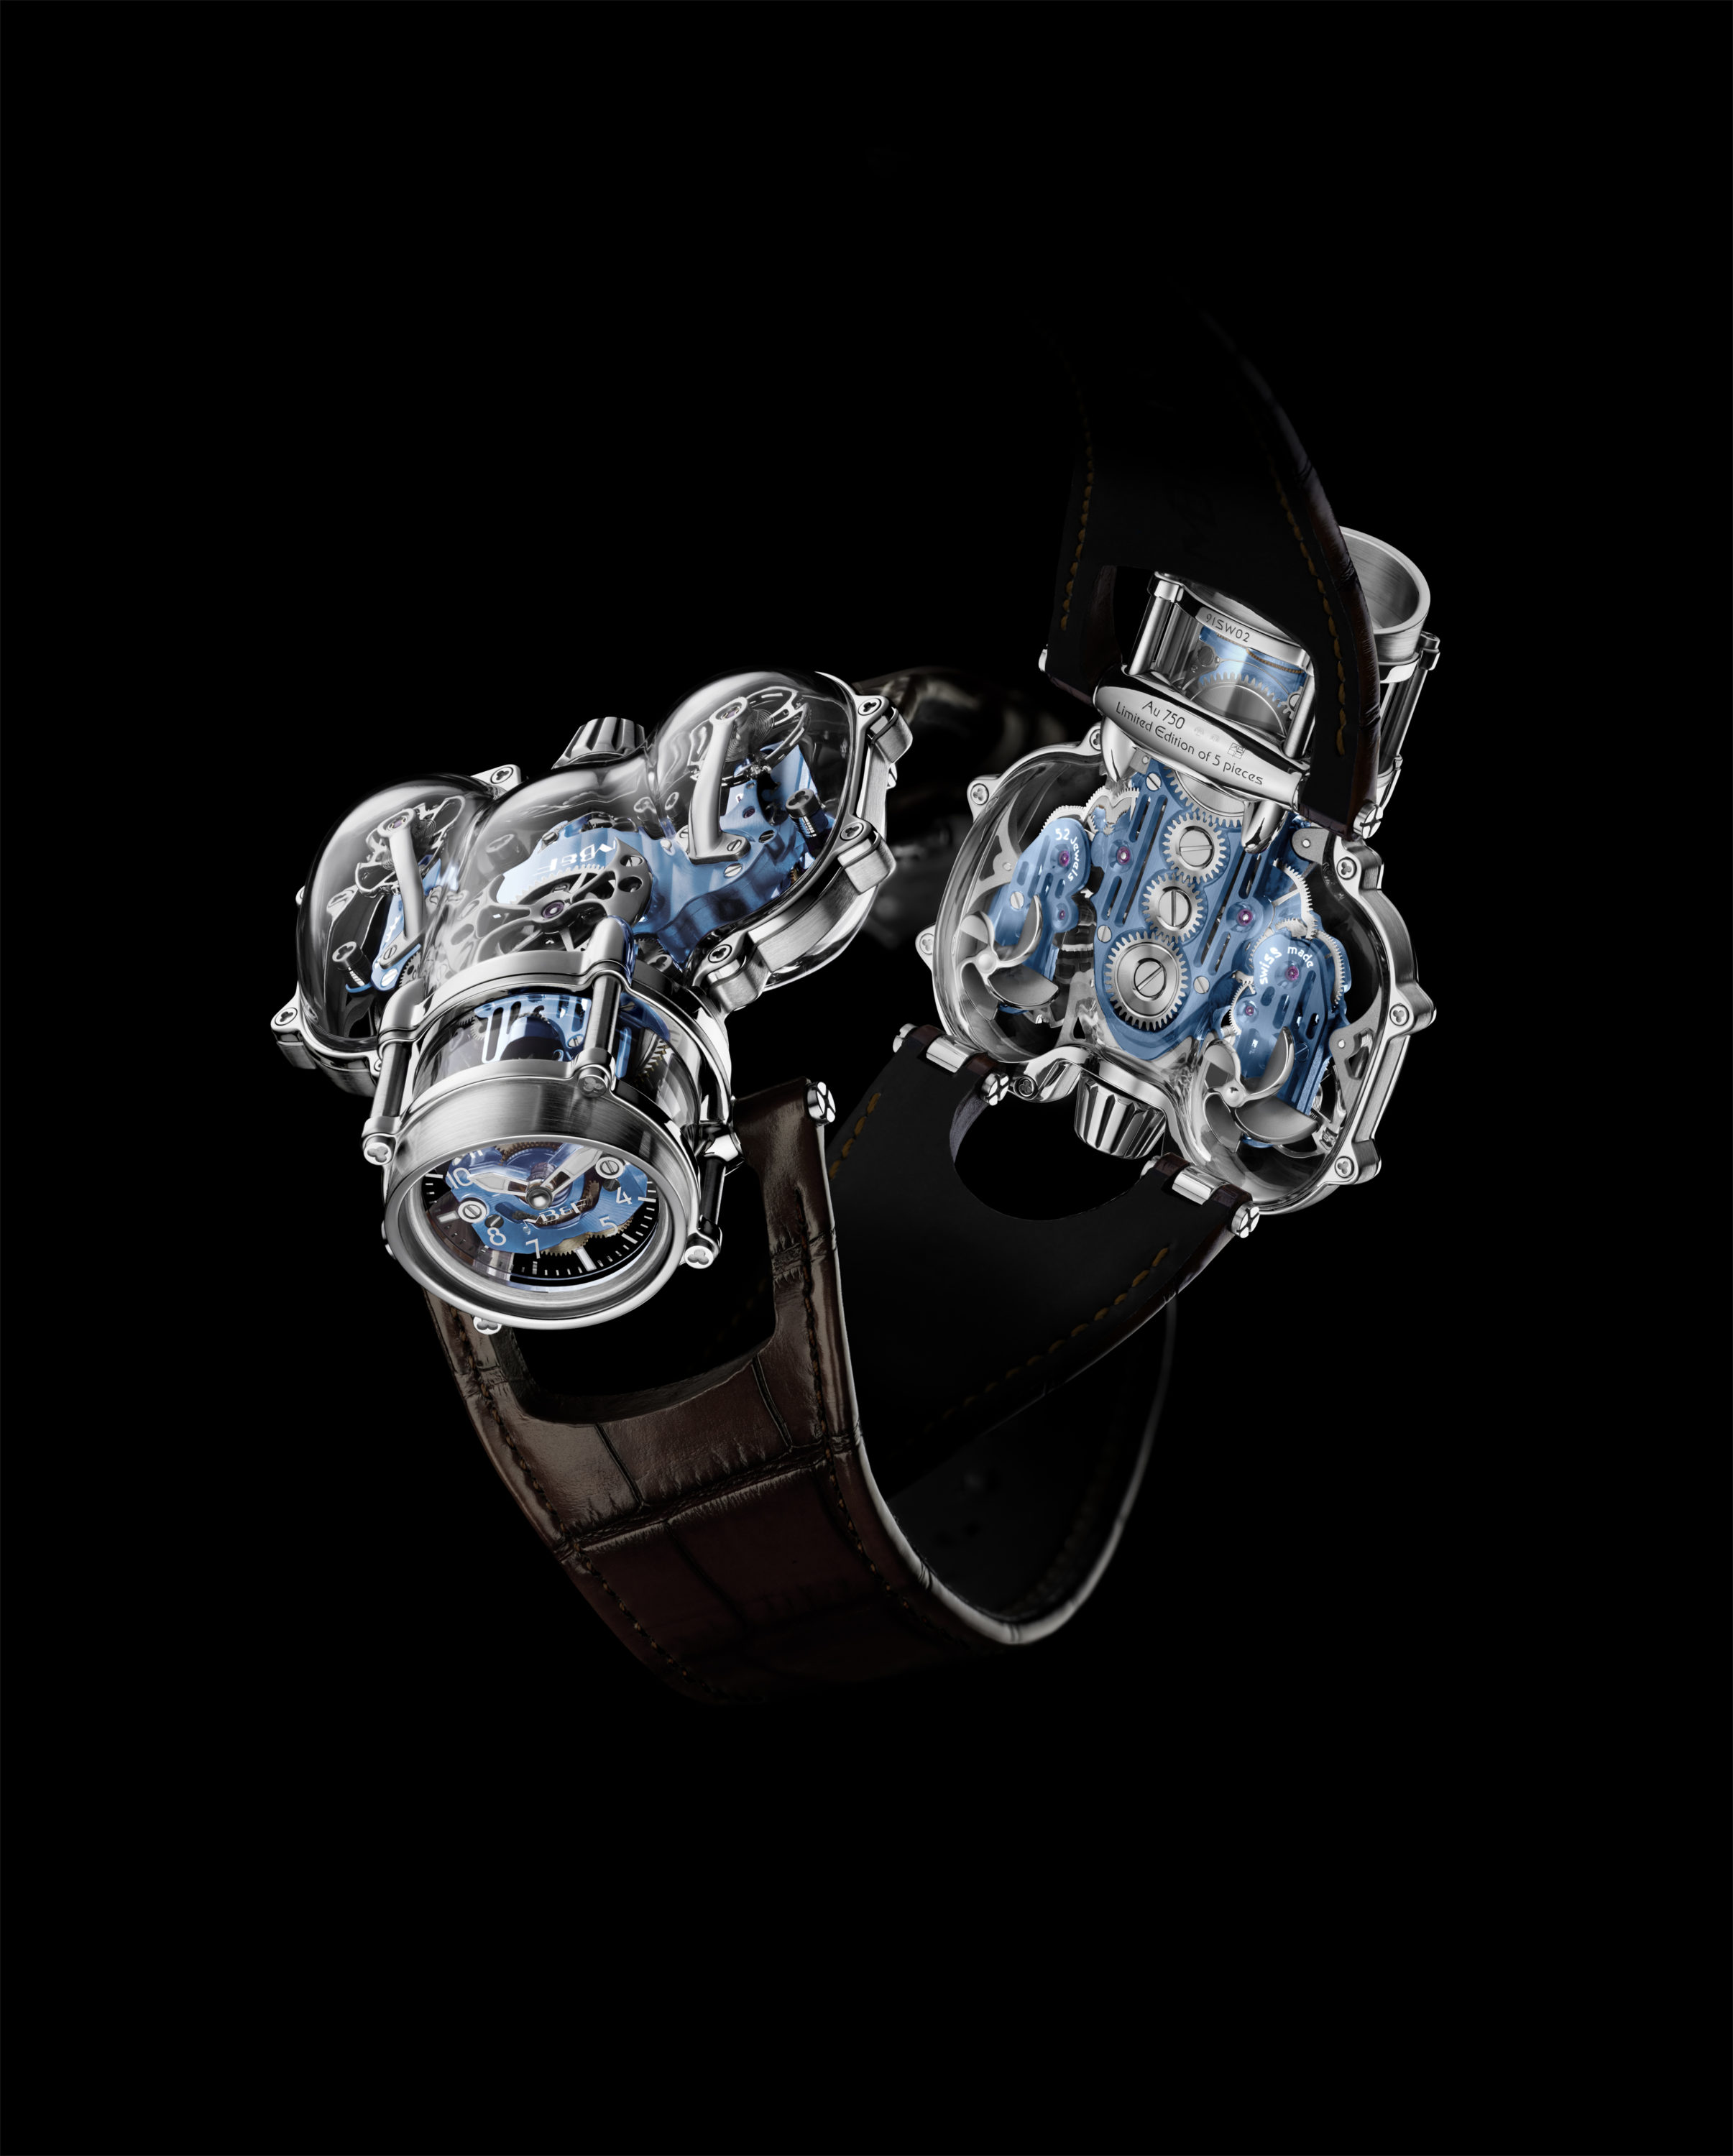 Showing at WatchTime New York 2023: MB&F HM9 Sapphire Vision